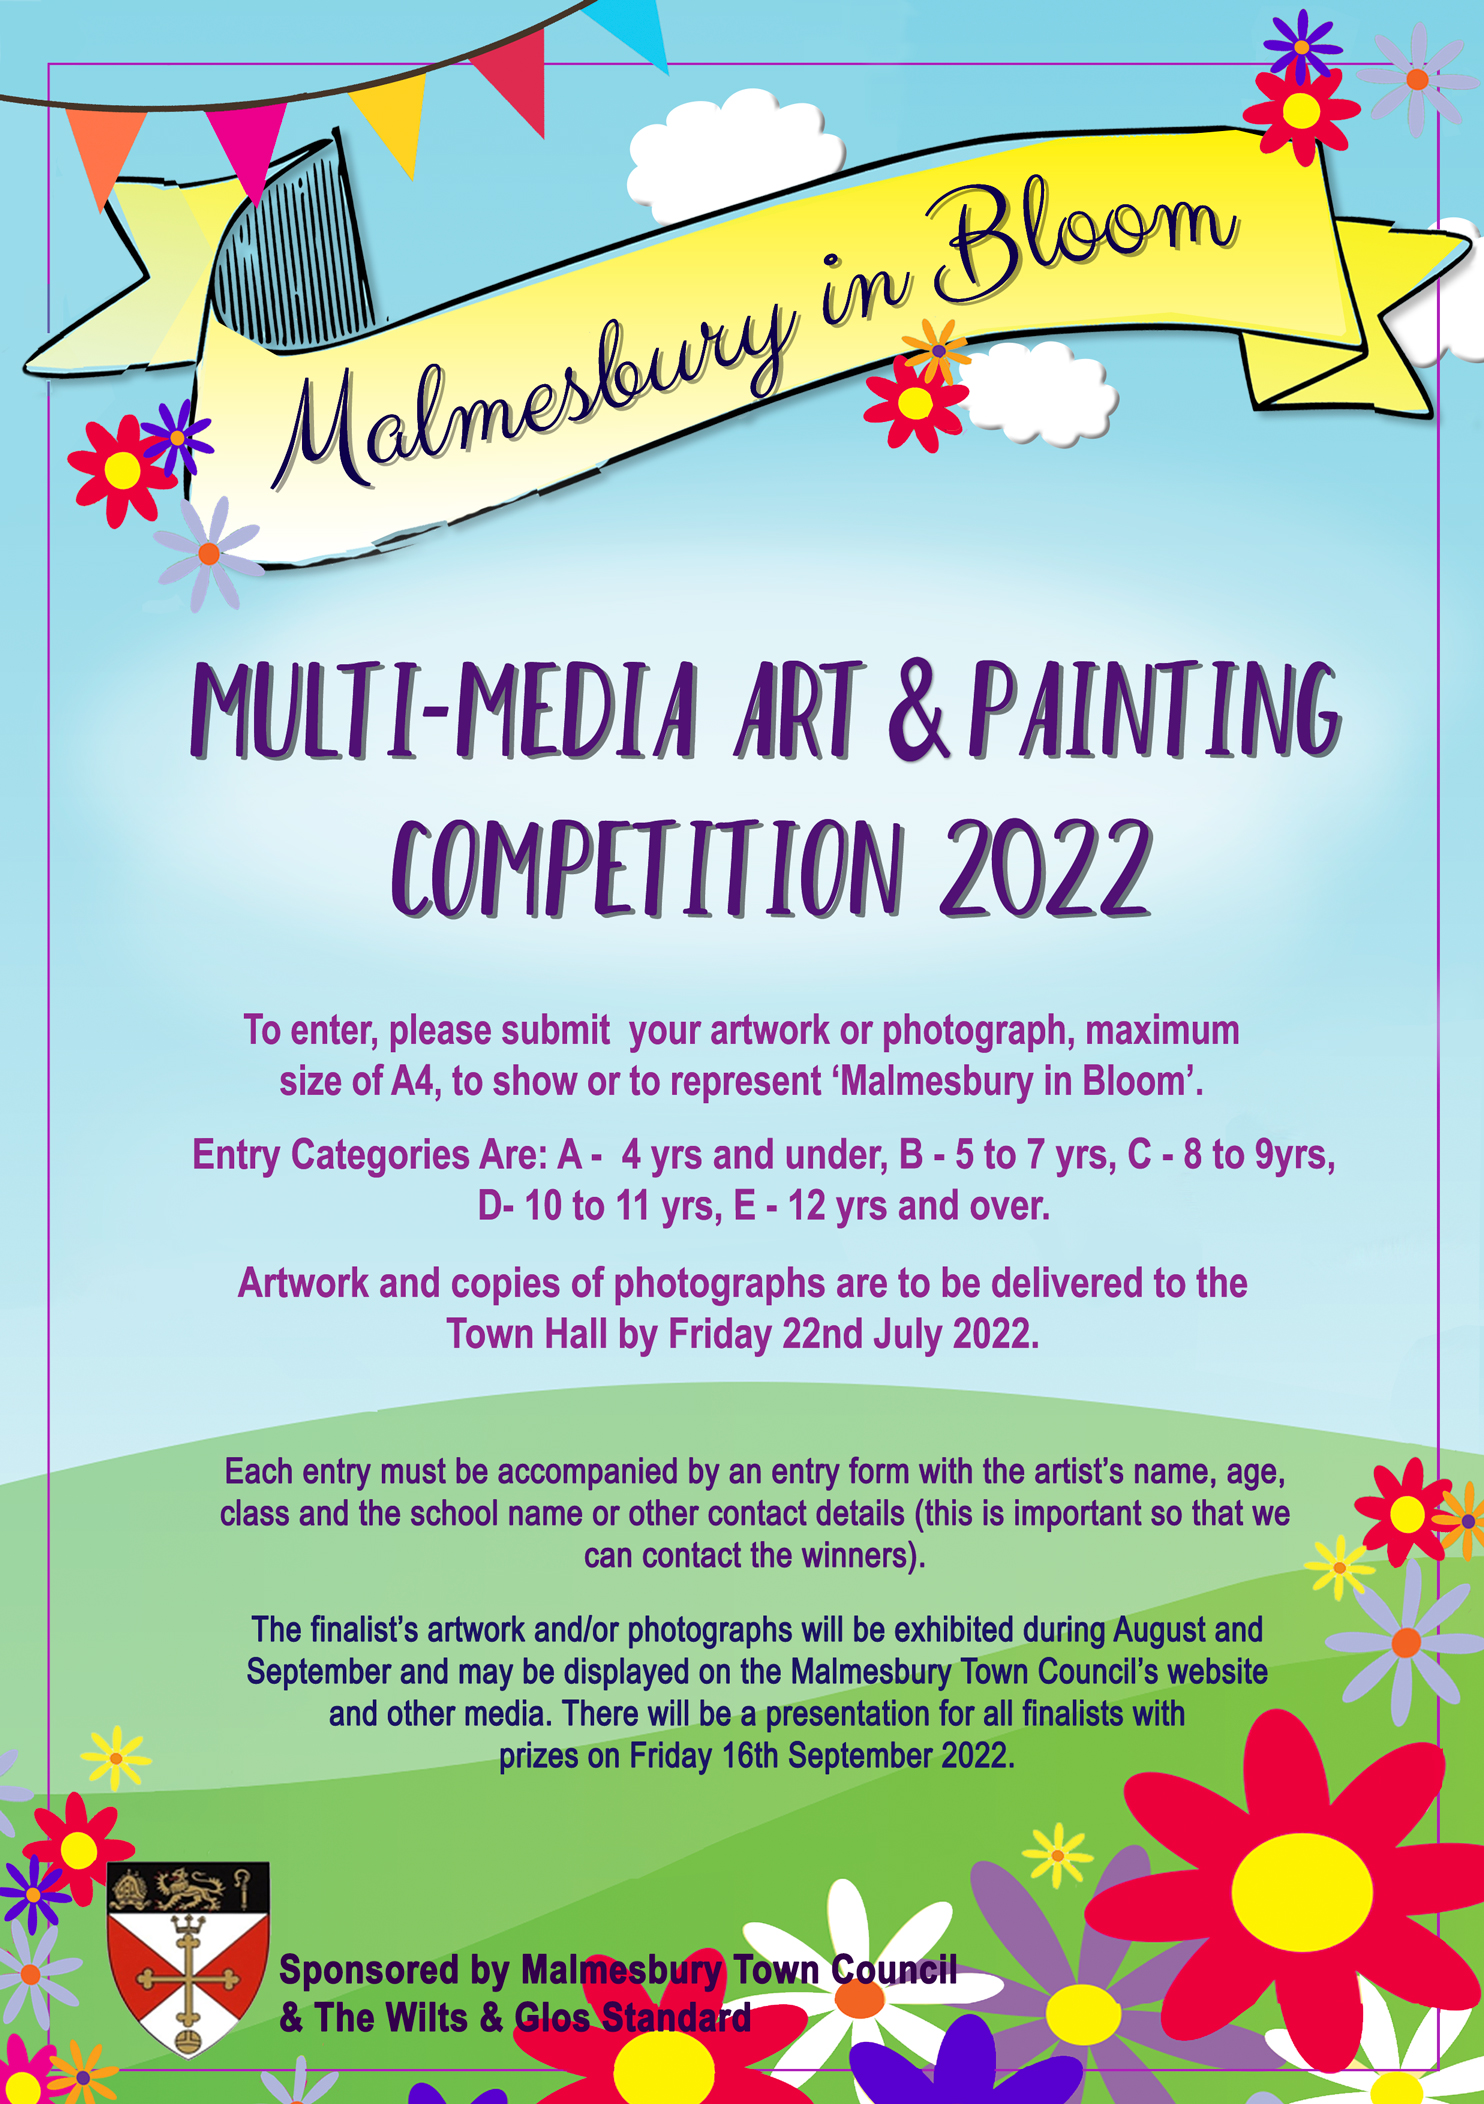 Malmesbury in Bloom 2022 Children's Multi-Media Art and Photography Competition